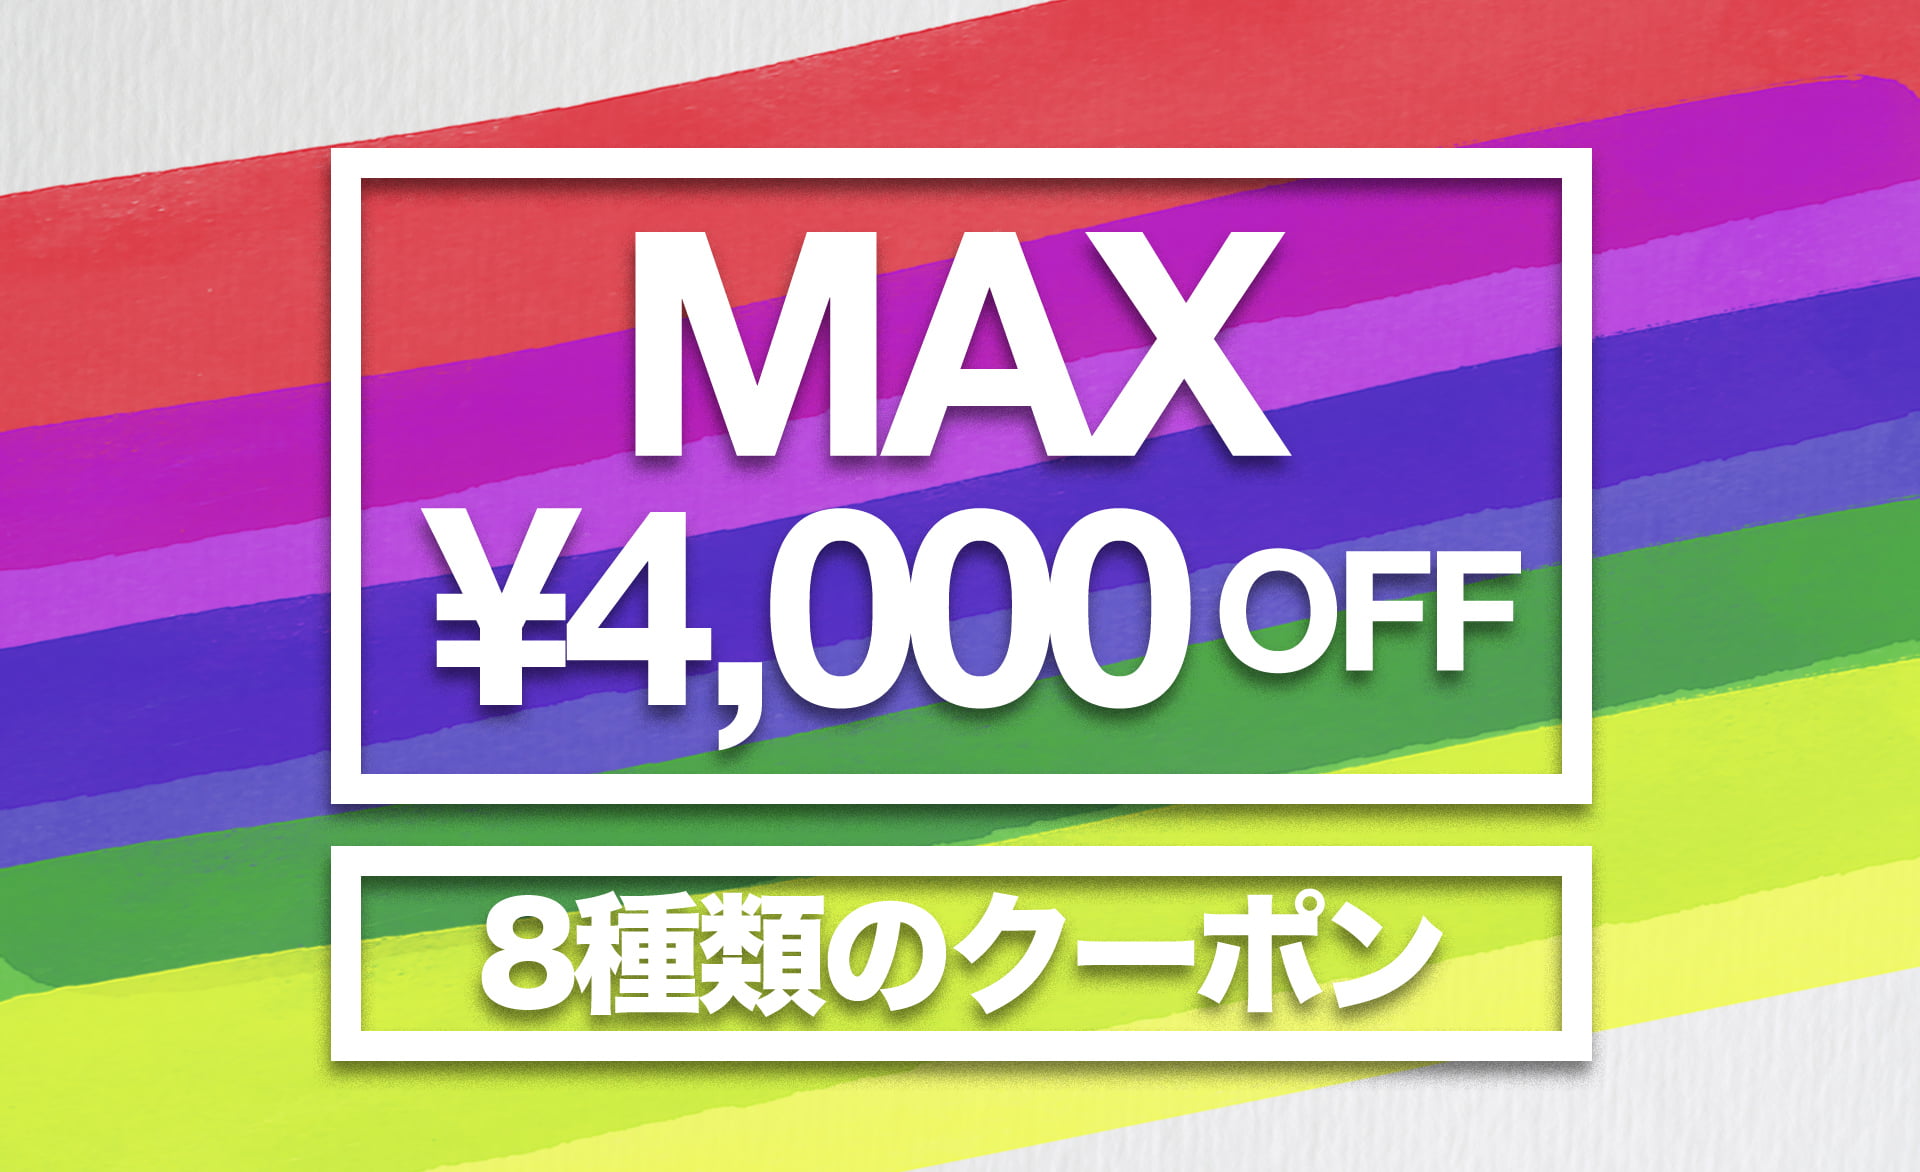 MAX￥4,000 OFF COUPON CAMPAIGN